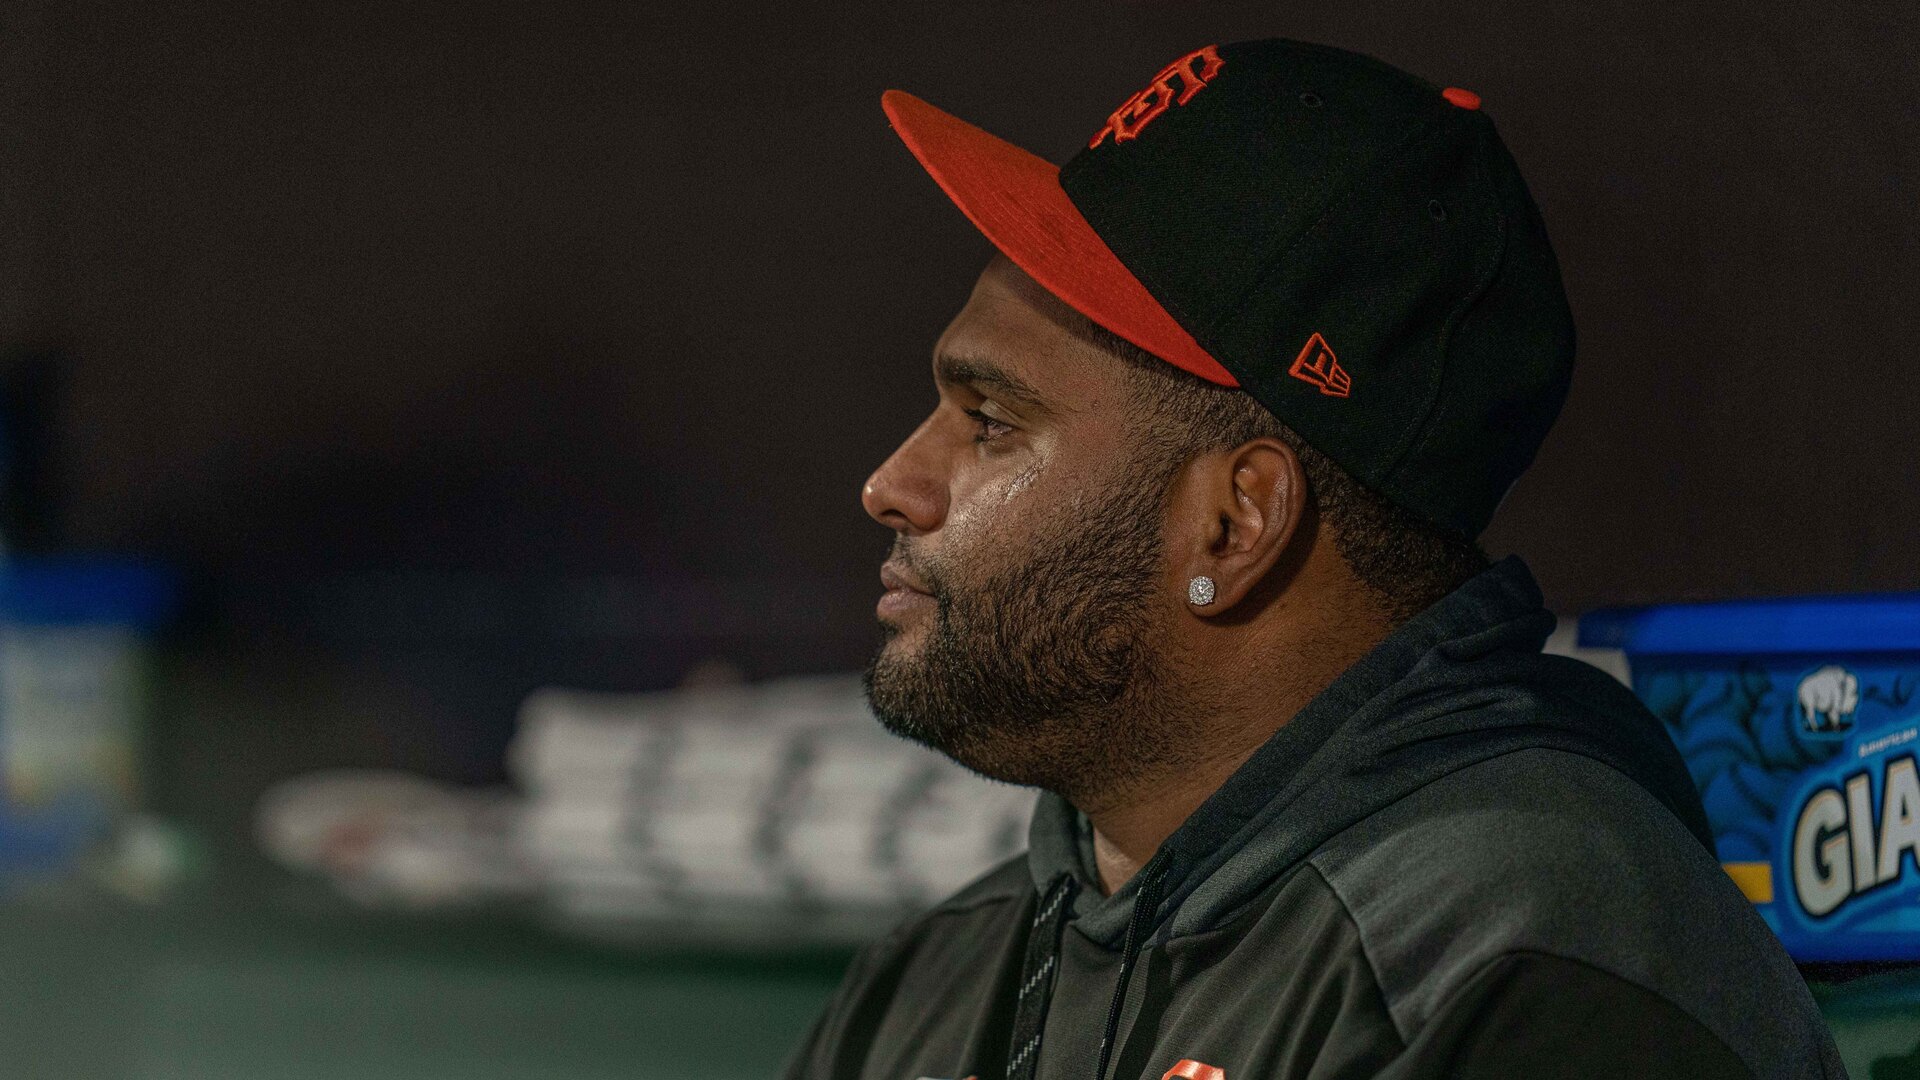 Report: Pablo Sandoval to reunite with the Giants on a minor league deal